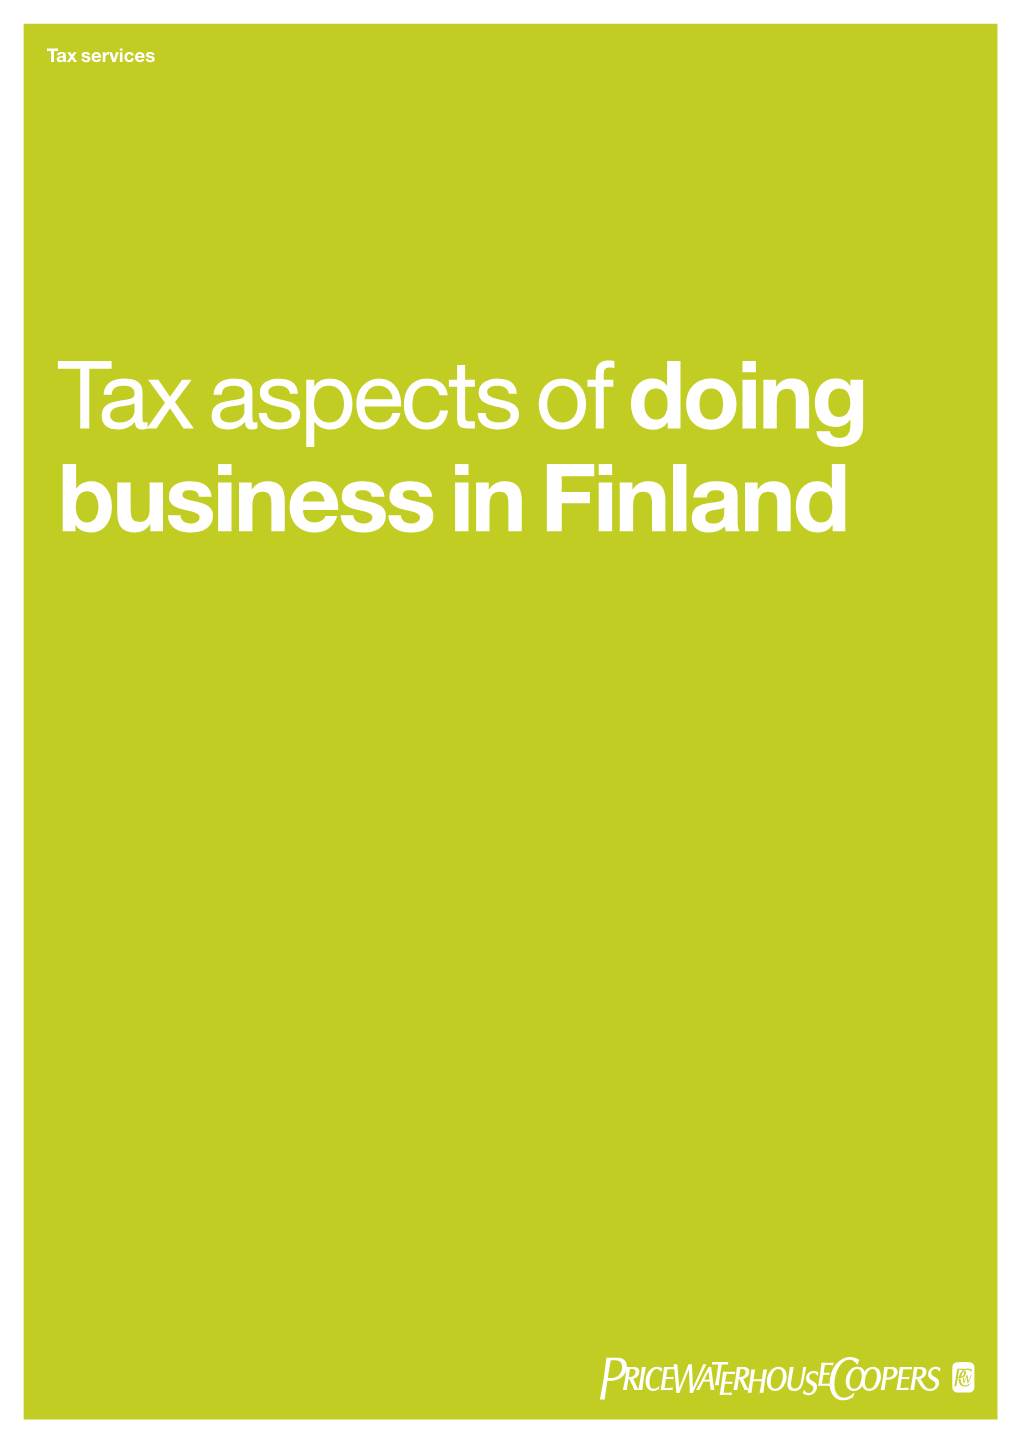 Tax Aspects of Doing Business in Finland2010